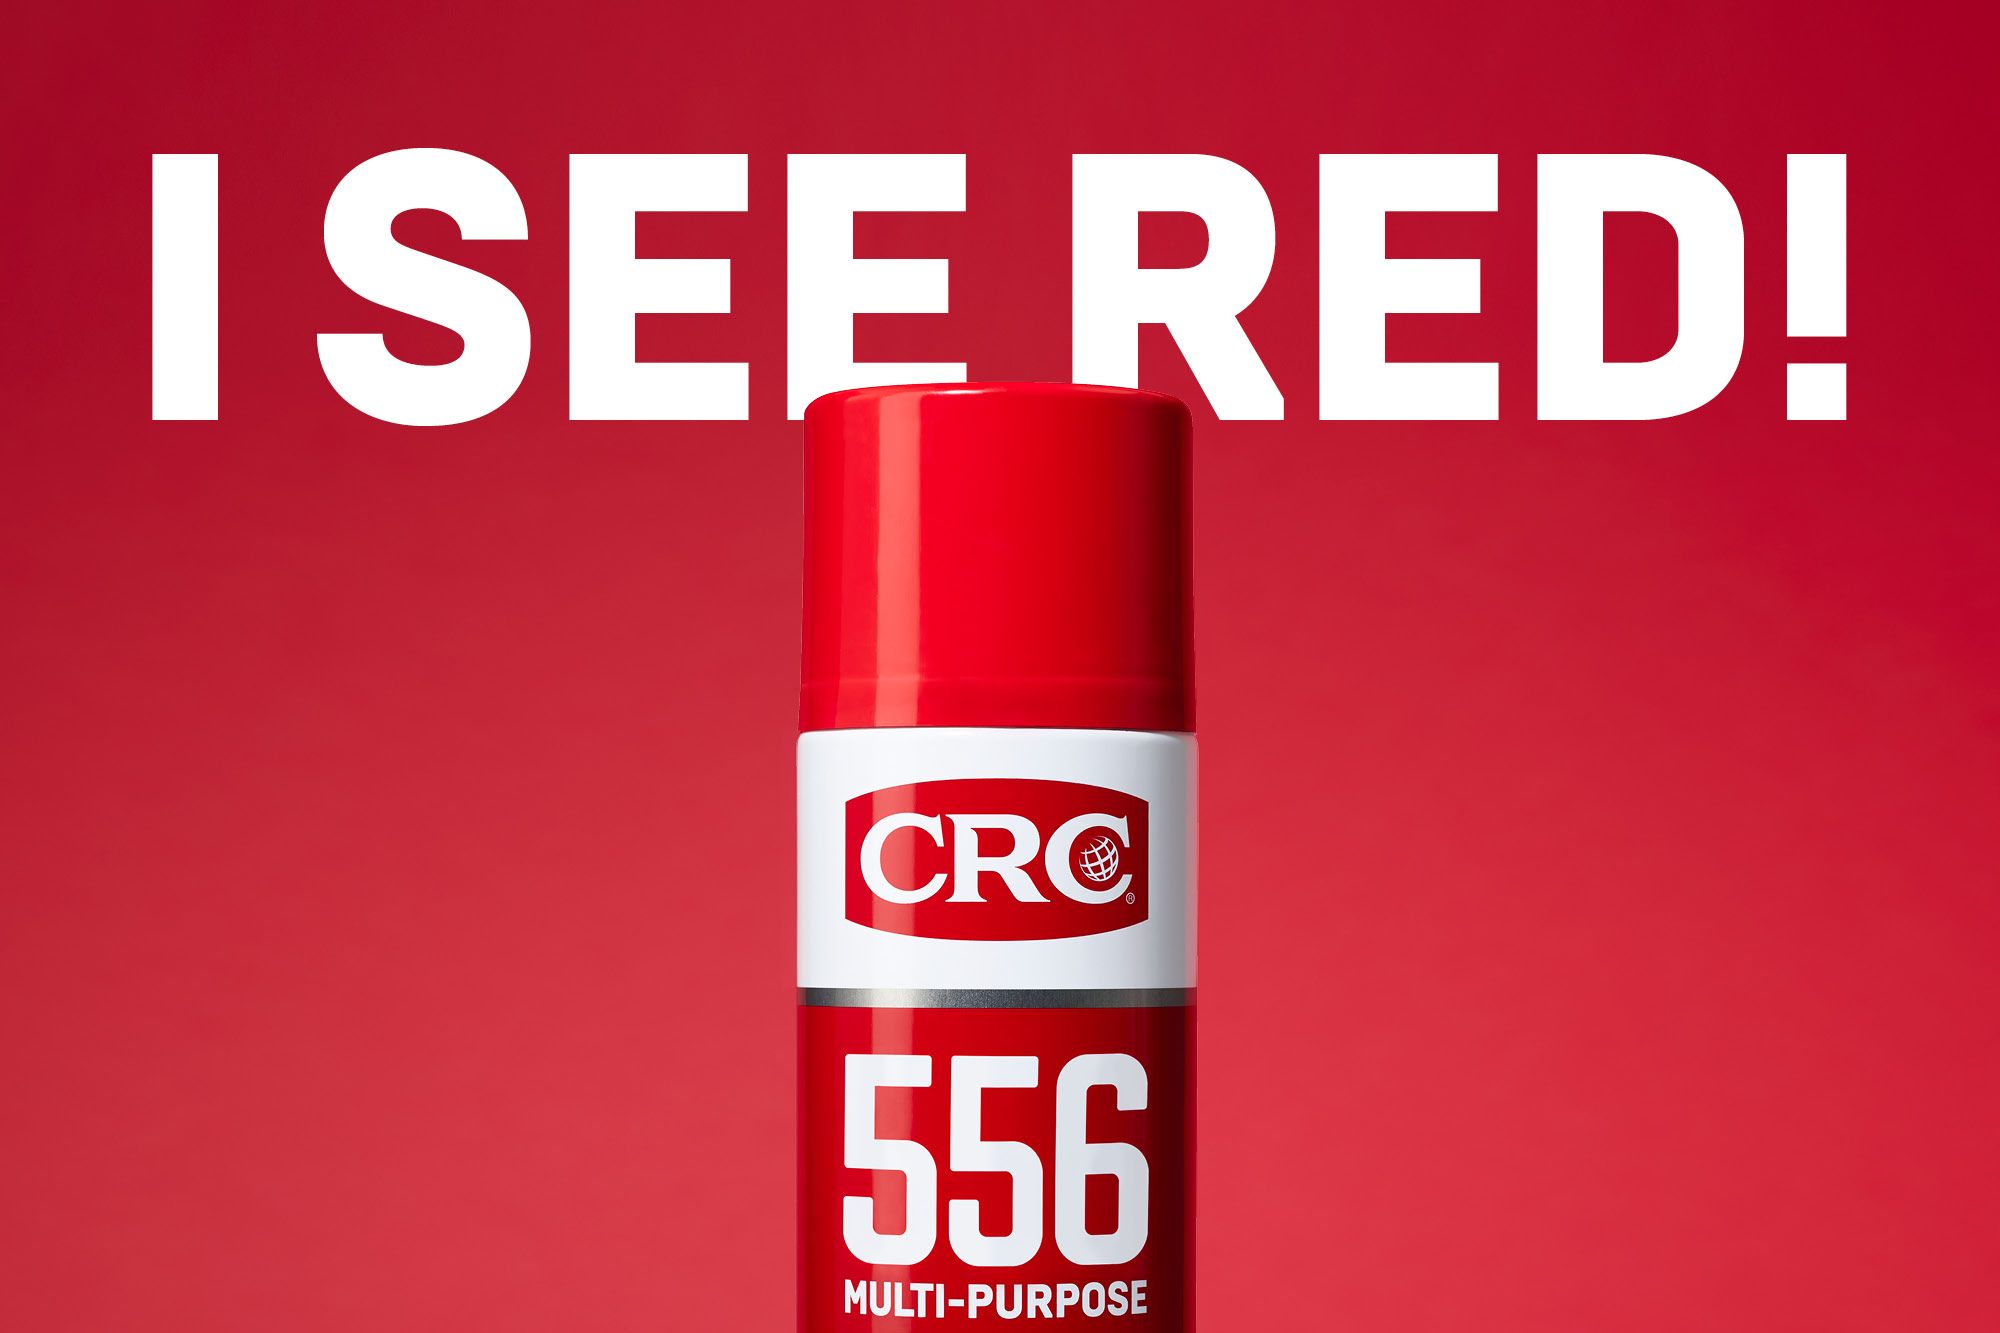 onfire design CRC 556 packaging redesign 2